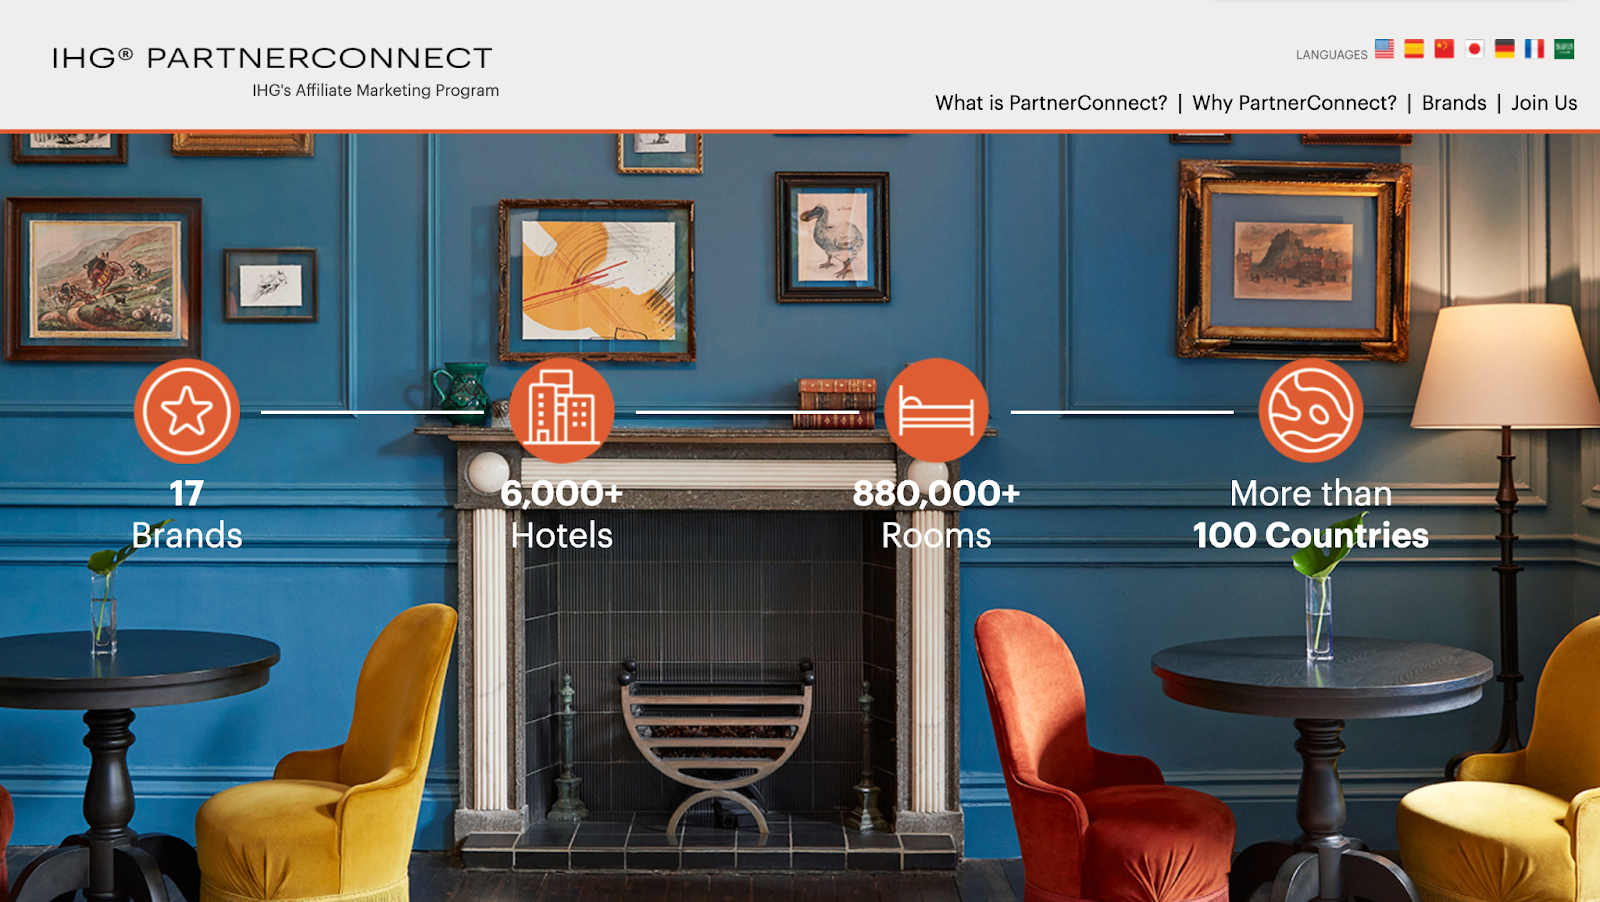 IHG's travel affiliate marketing page on their website